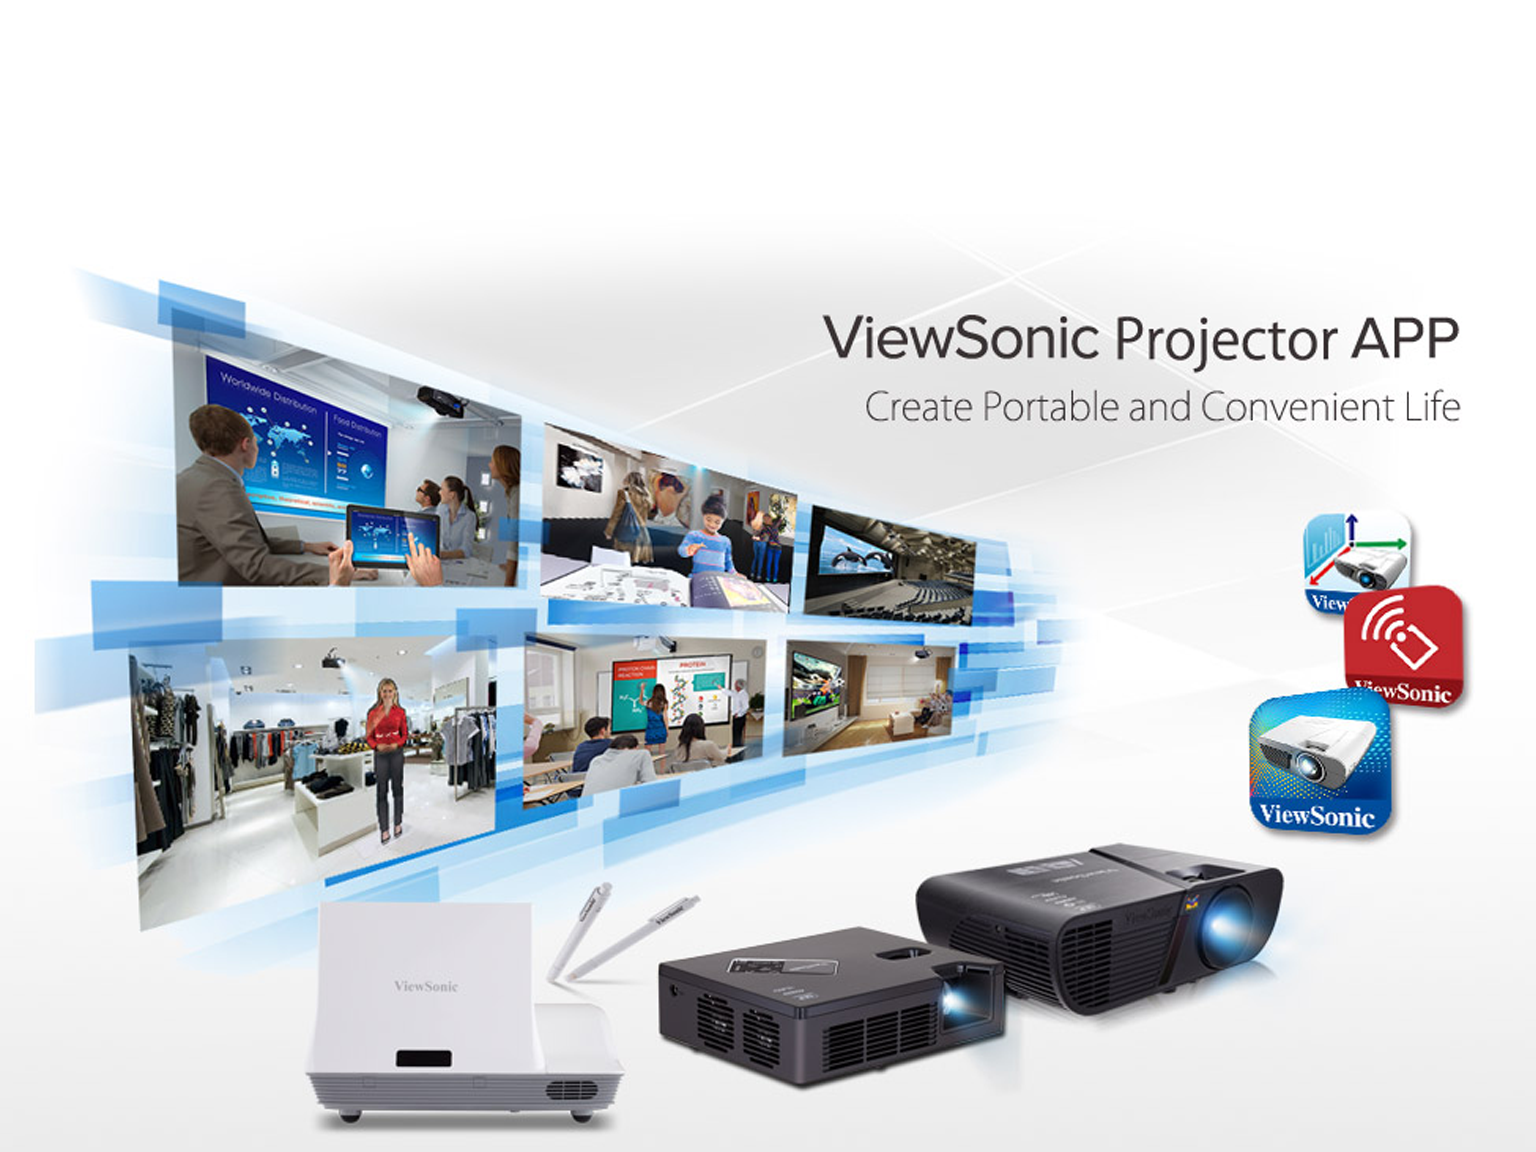 ViewSonic Projector options for businesses and meeting room installations